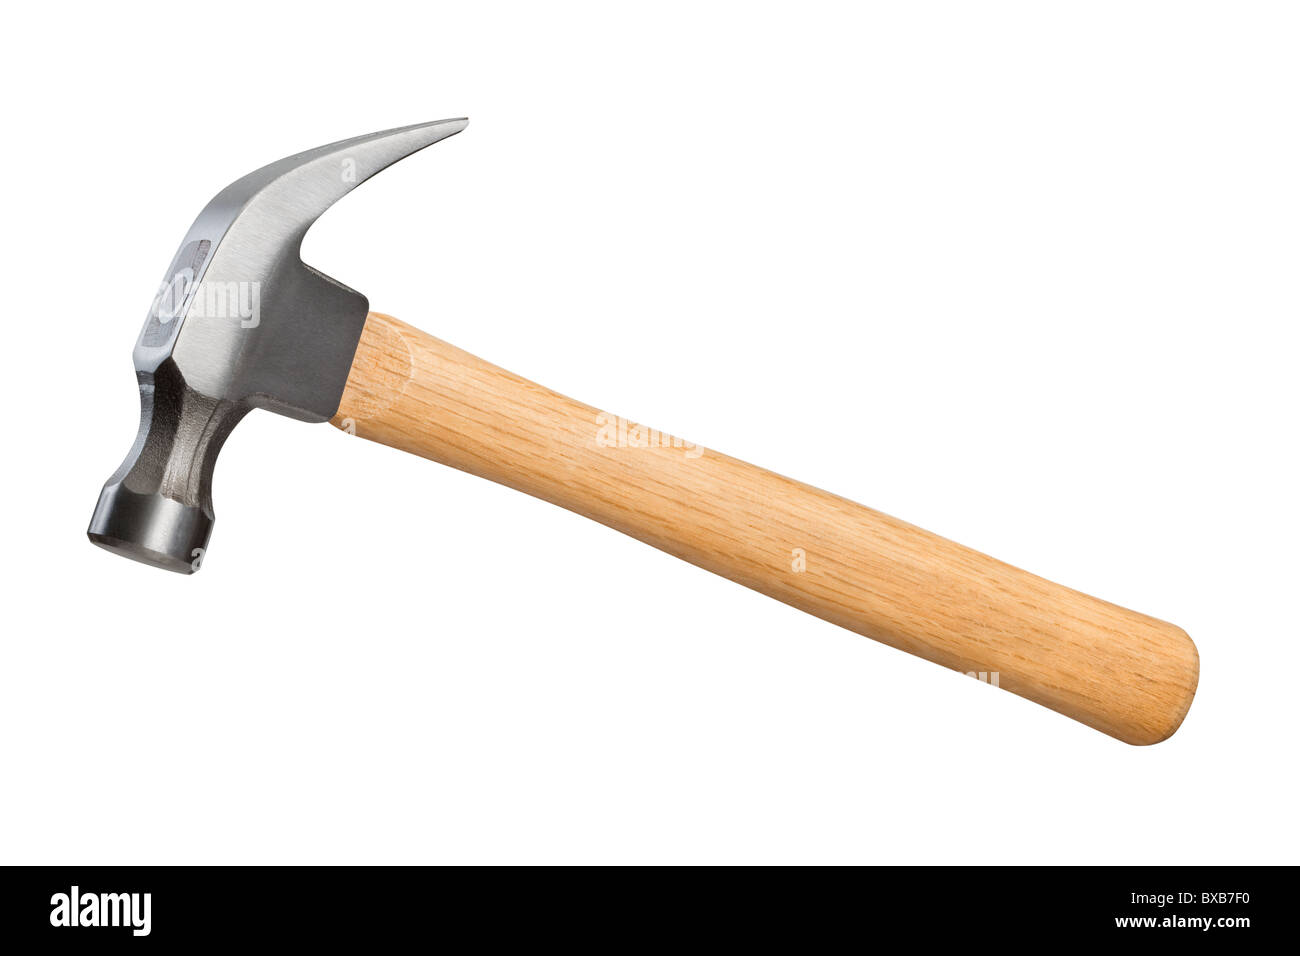 Hammer isolated on a white background. Full focus front & back. Stock Photo